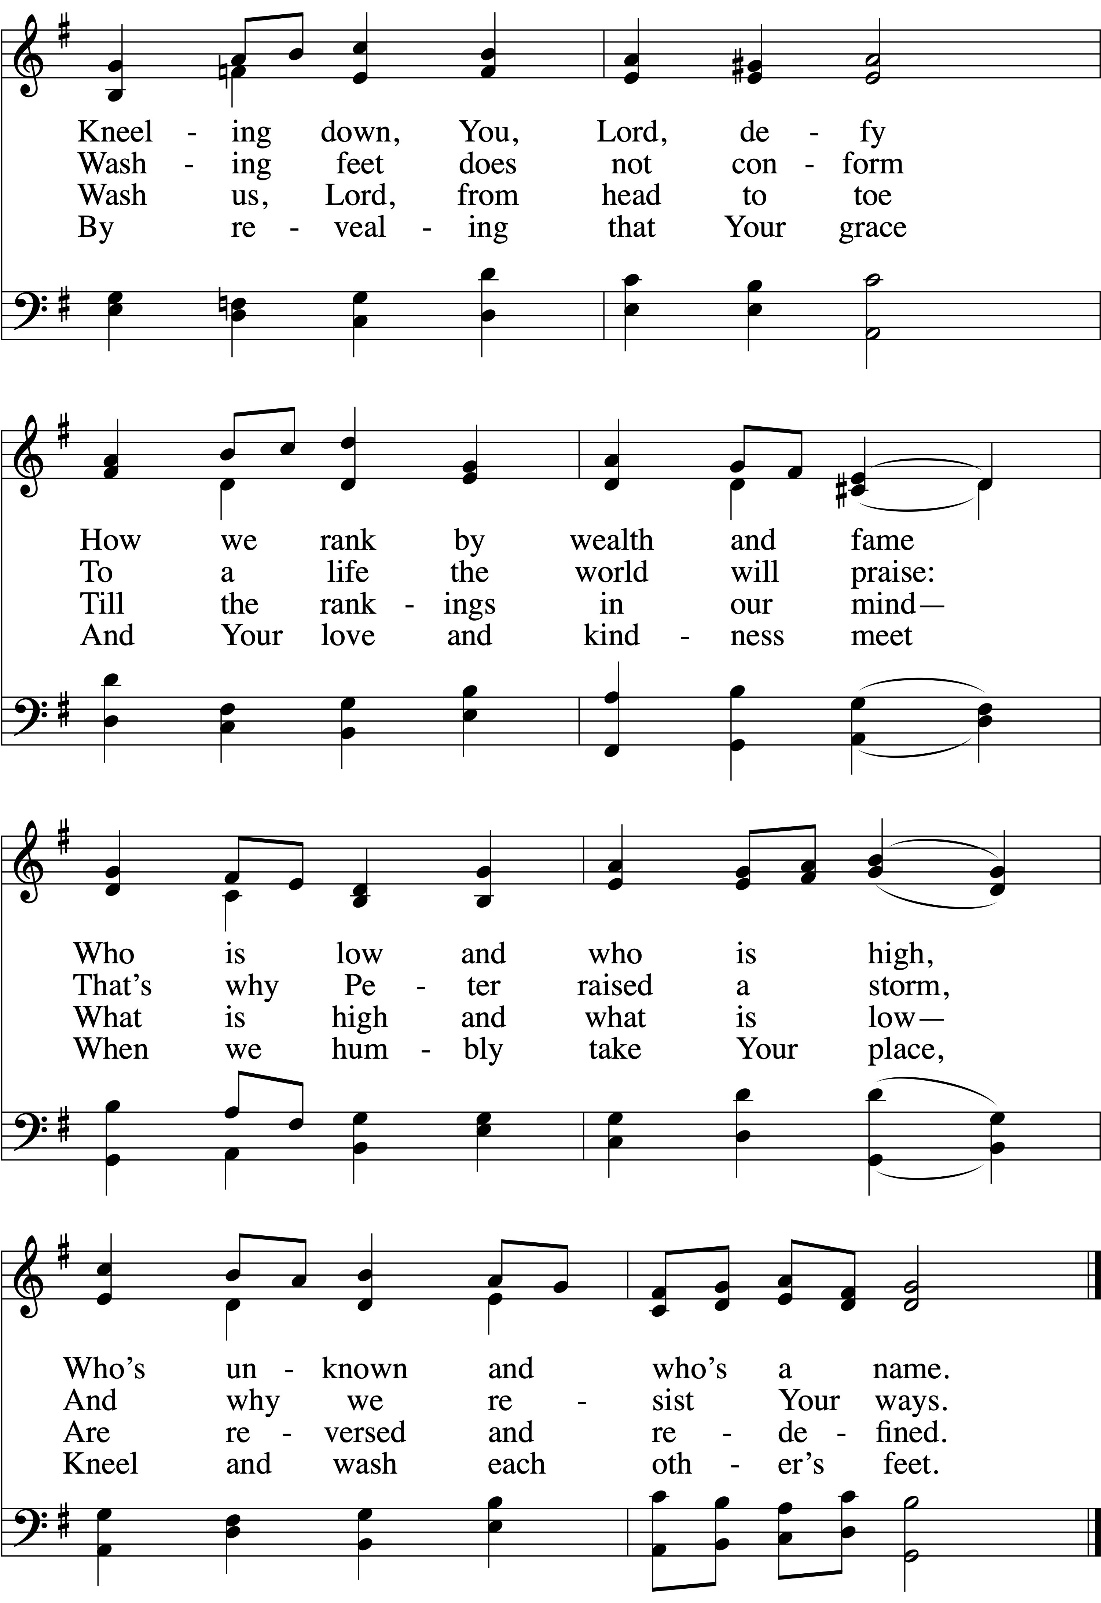 A sheet music with black and white text Description automatically generated